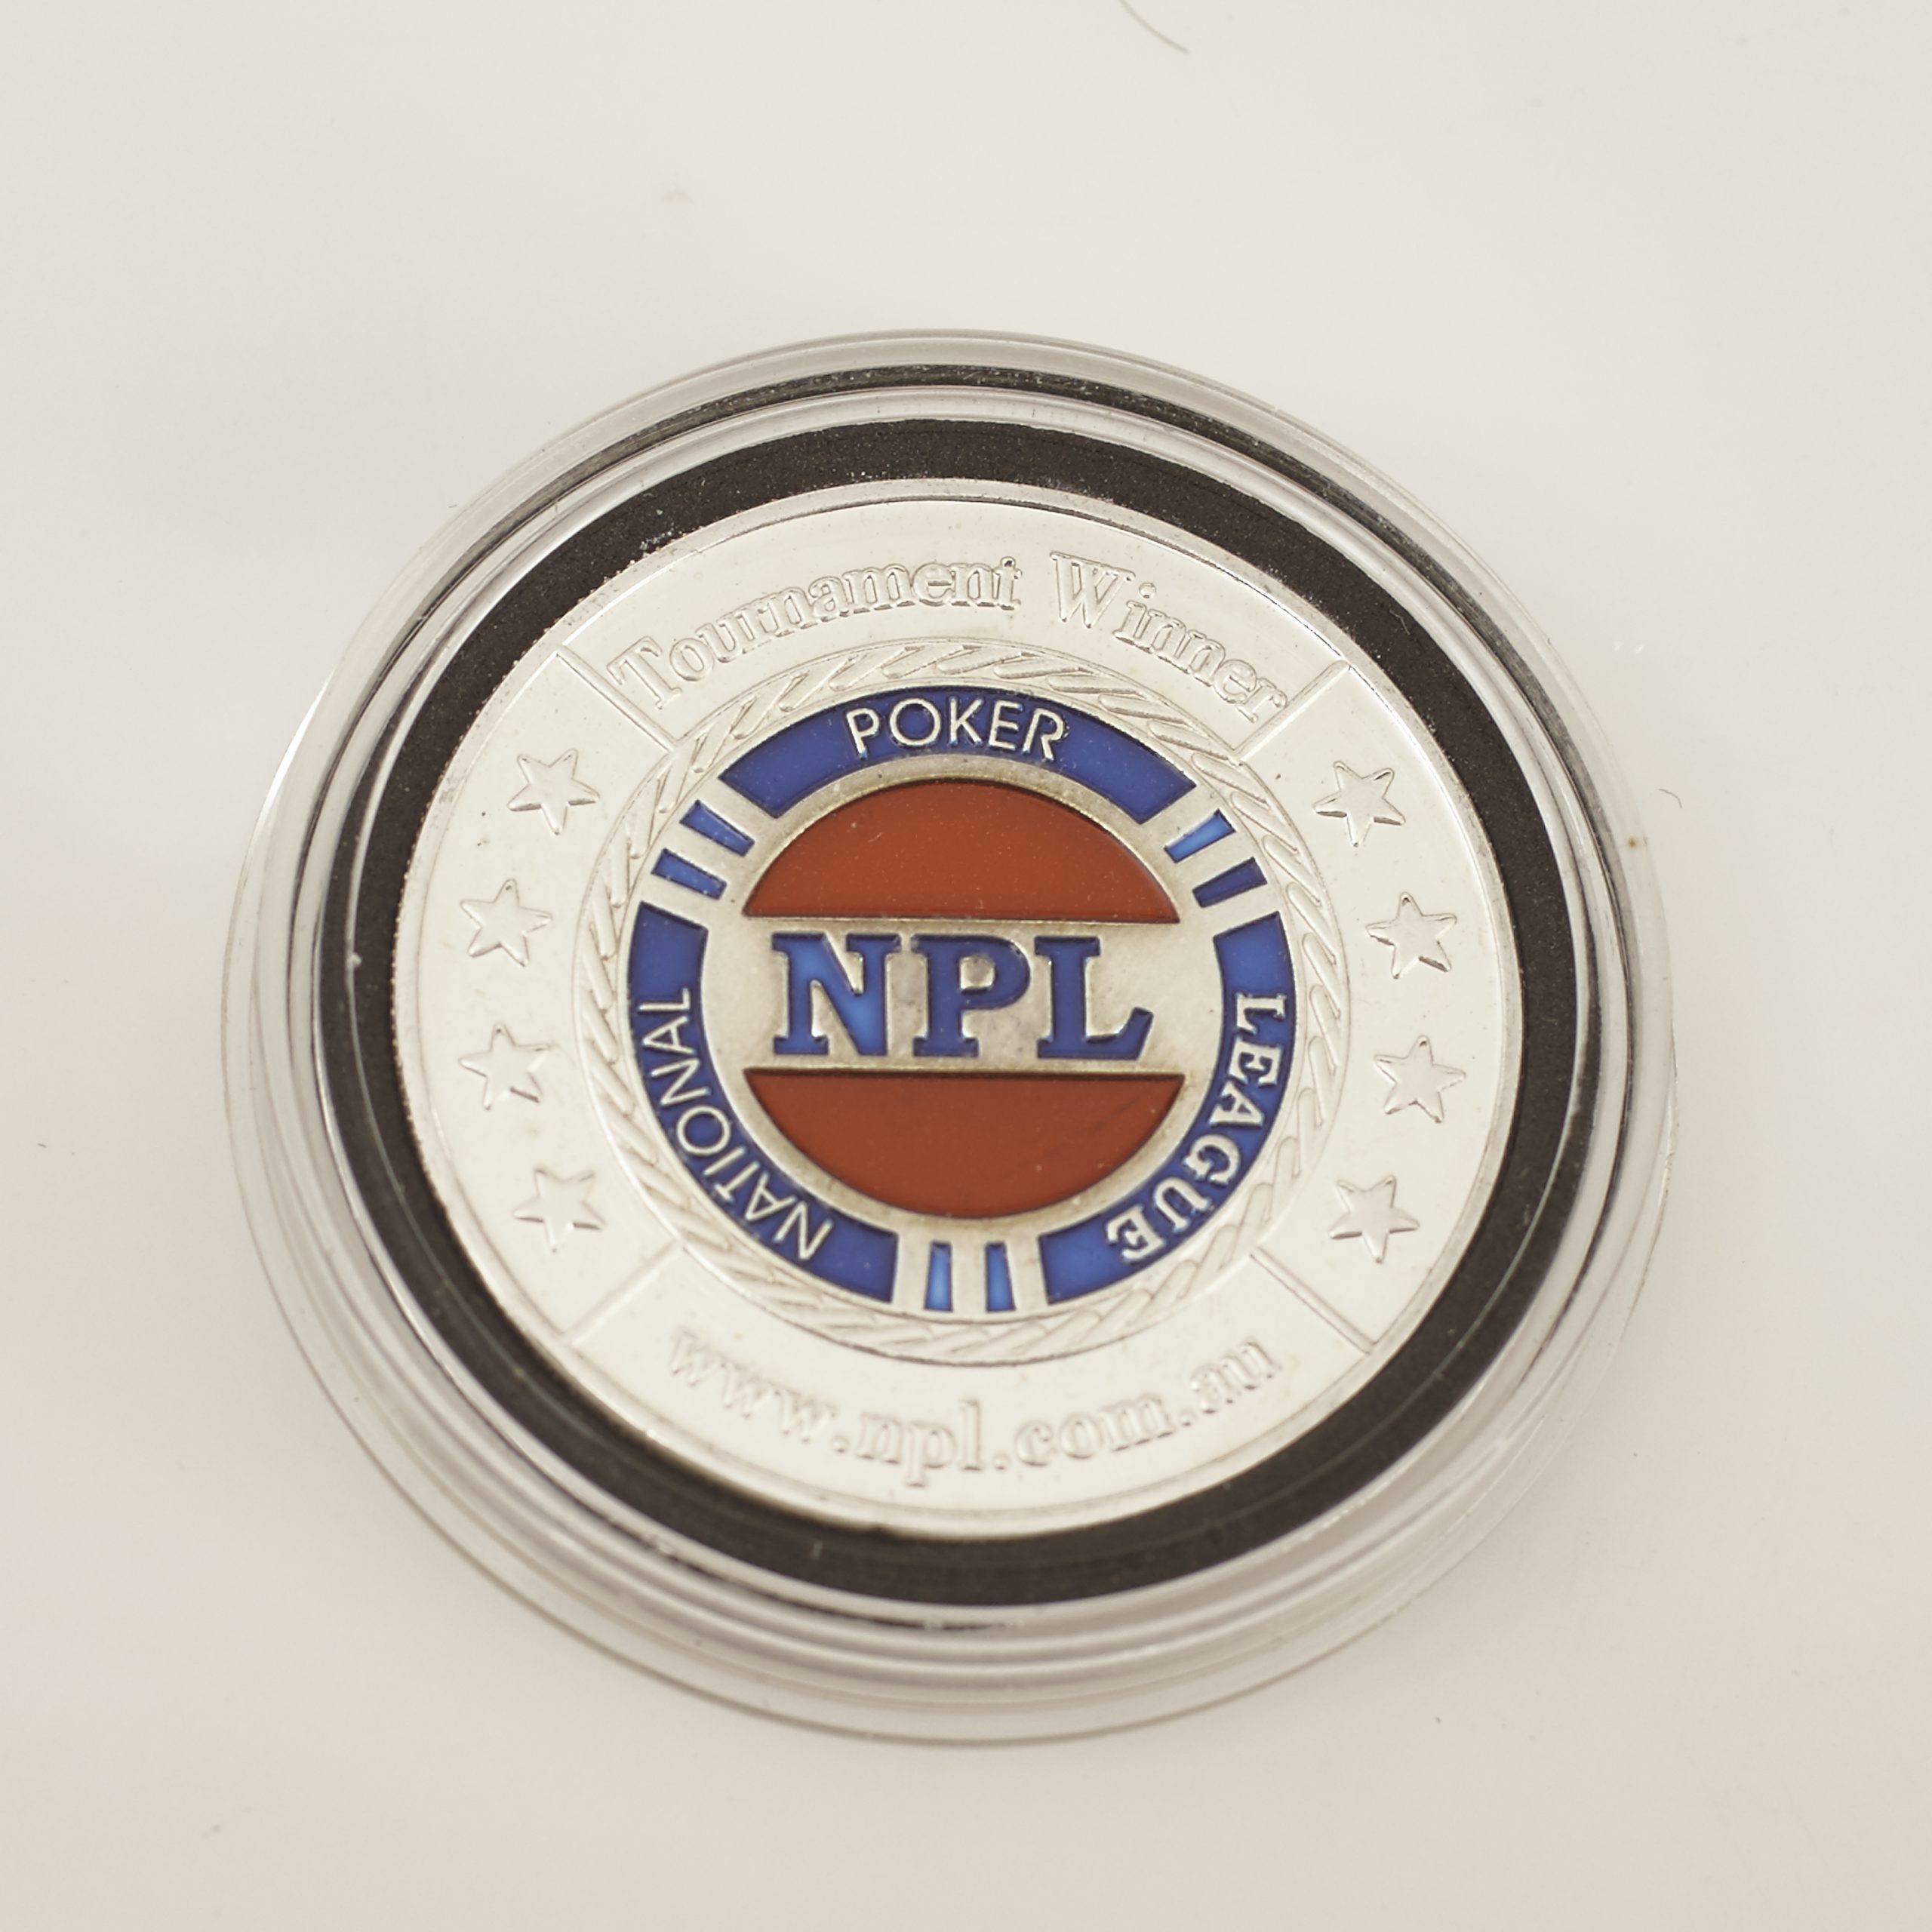 NPL, NATIONAL POKER LEAGUE, DON’T PLAY WITH THE DEVIL, (Silver) Poker Card Guard